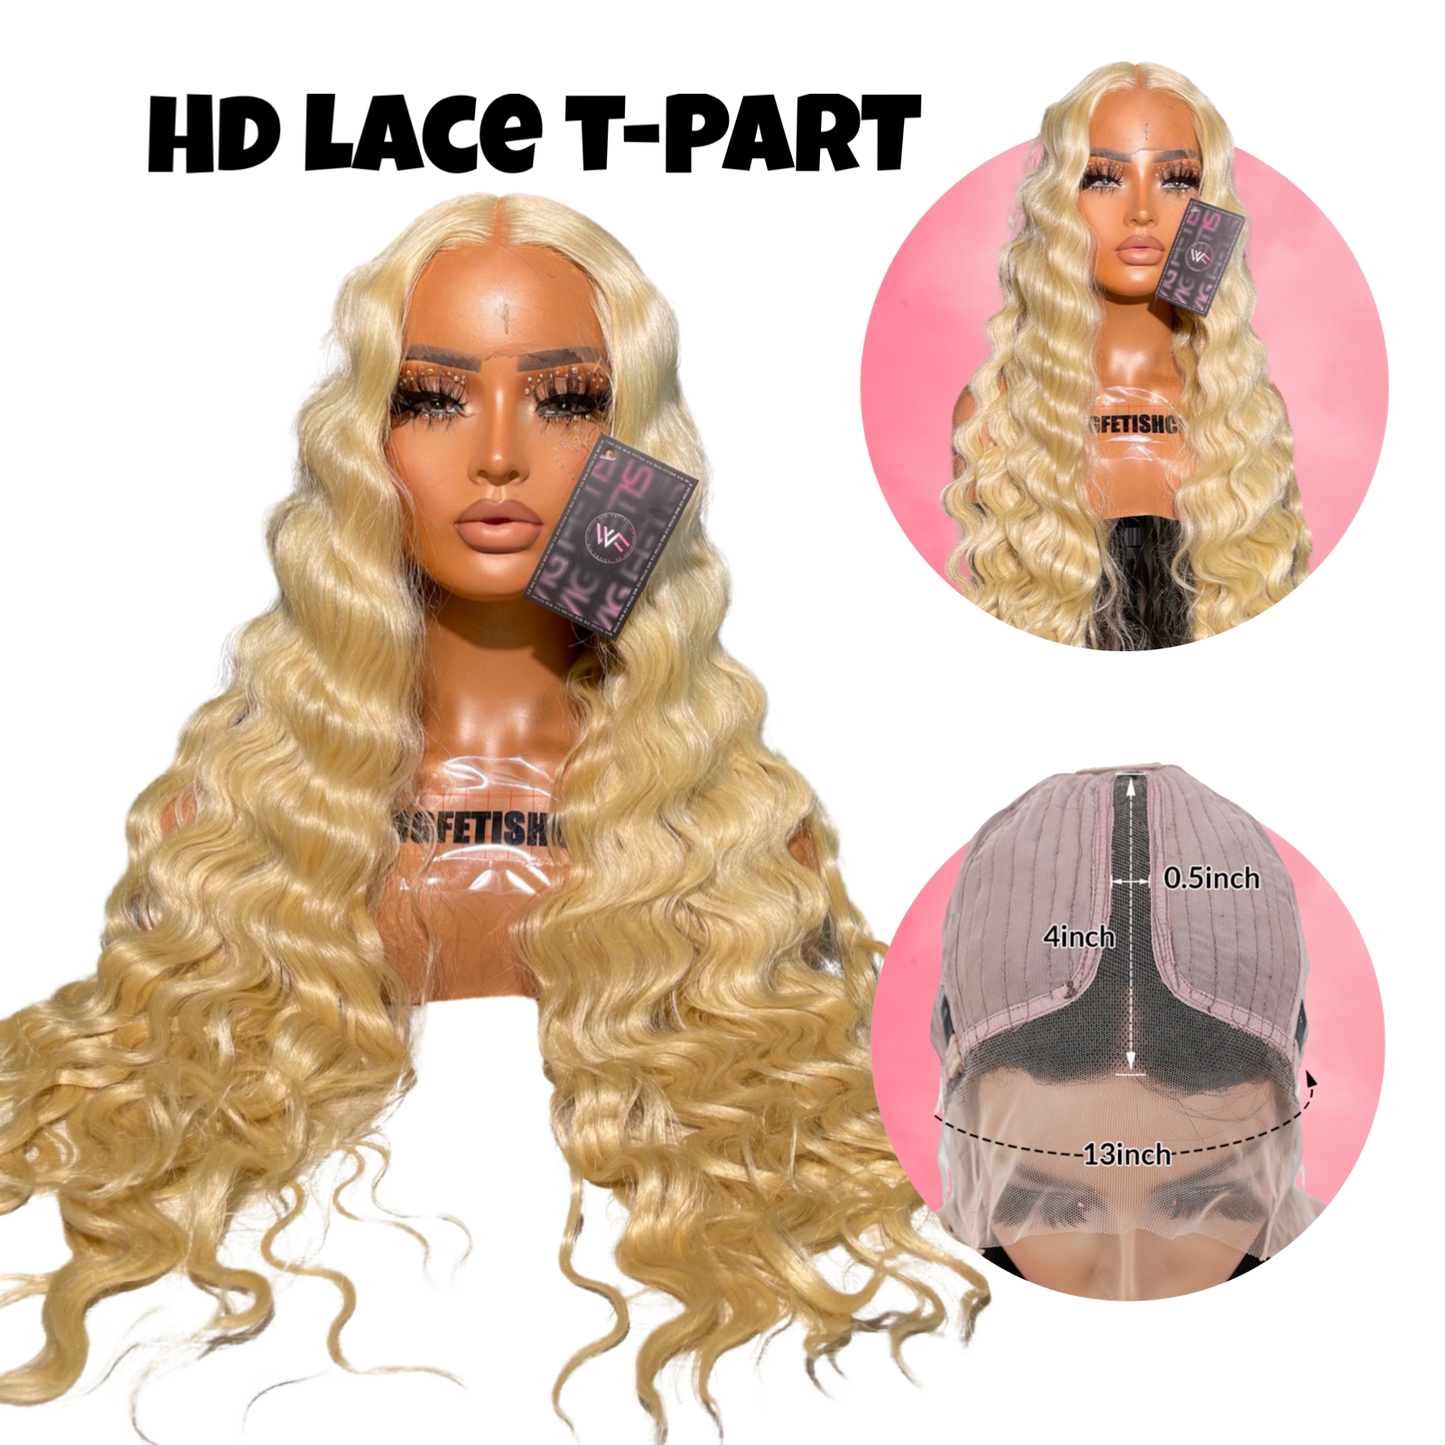 HD LACE 30 INCH T PART (GLUELESS) DEEP WAVE 613